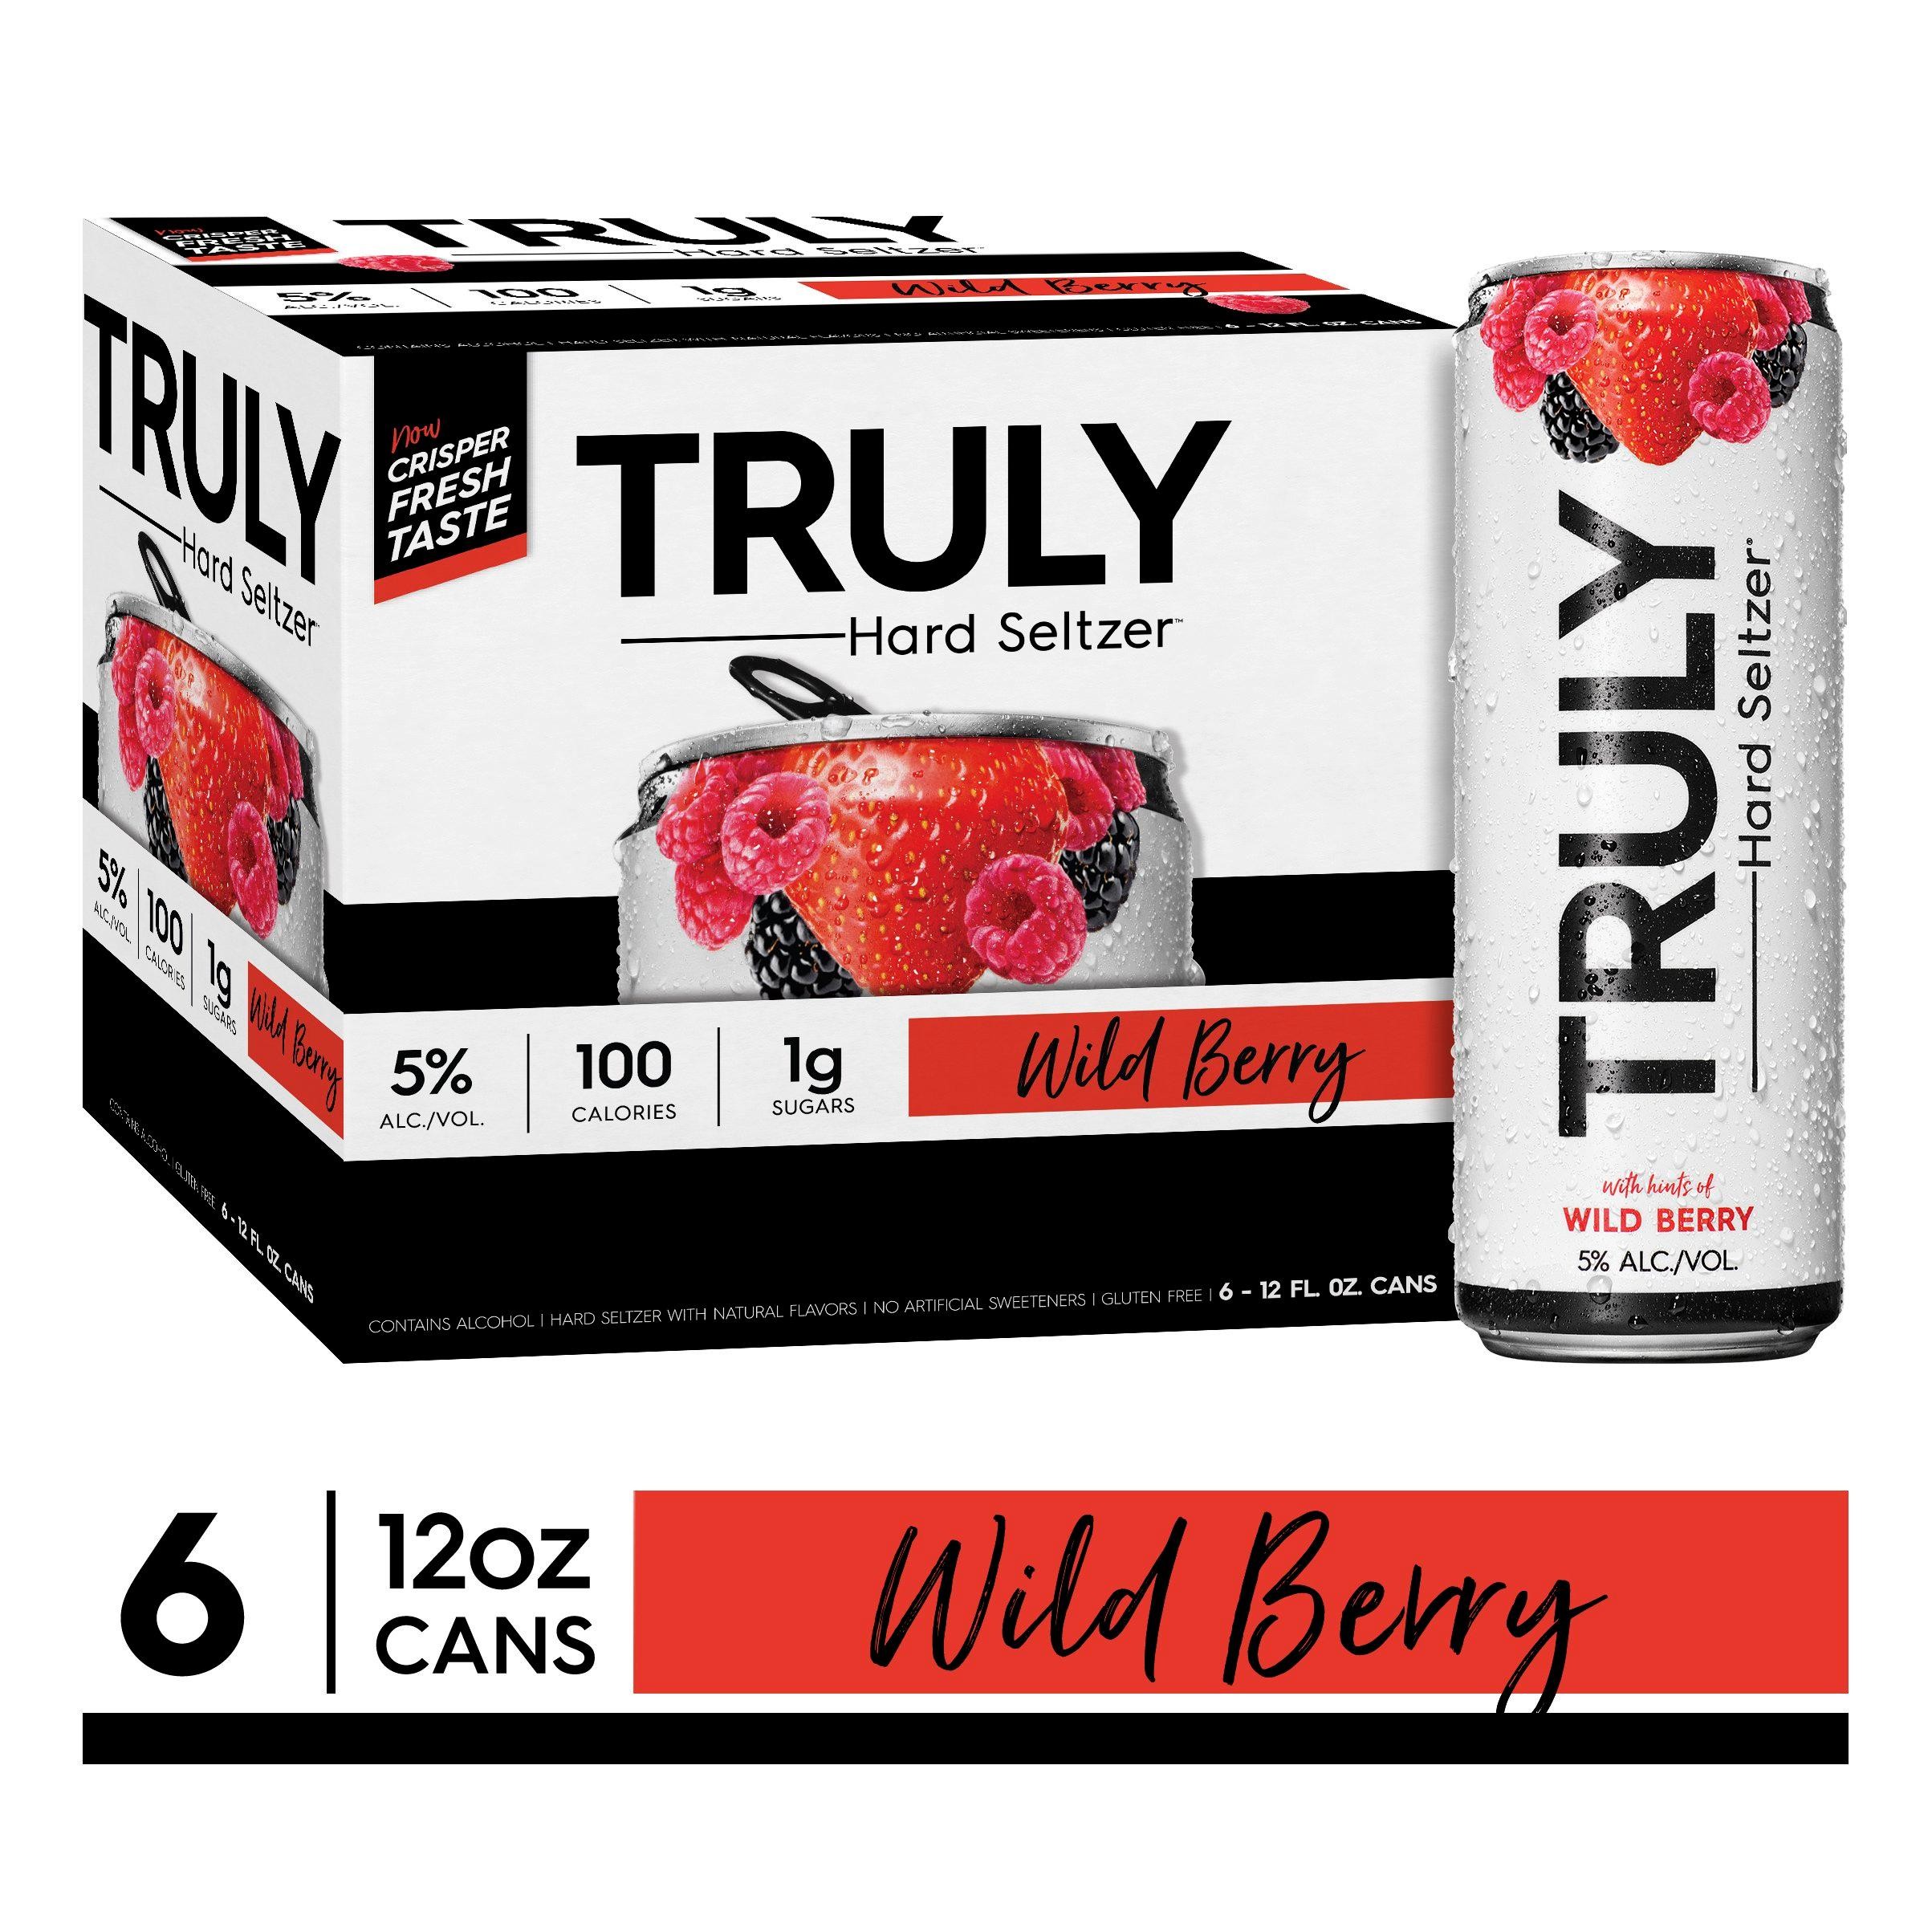 TRULY Hard Seltzer Wild Berry, - 6pk Cans